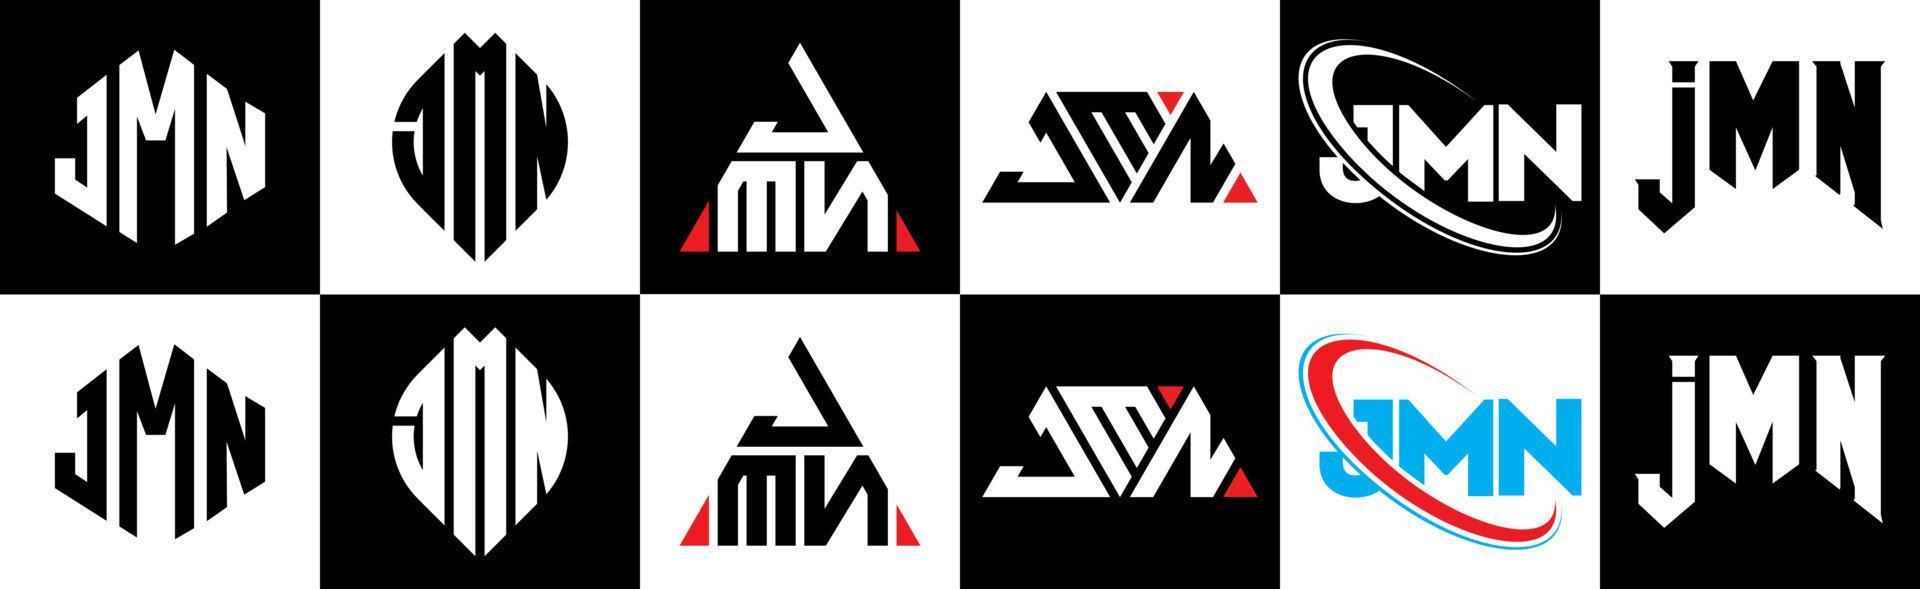 JMN letter logo design in six style. JMN polygon, circle, triangle, hexagon, flat and simple style with black and white color variation letter logo set in one artboard. JMN minimalist and classic logo vector